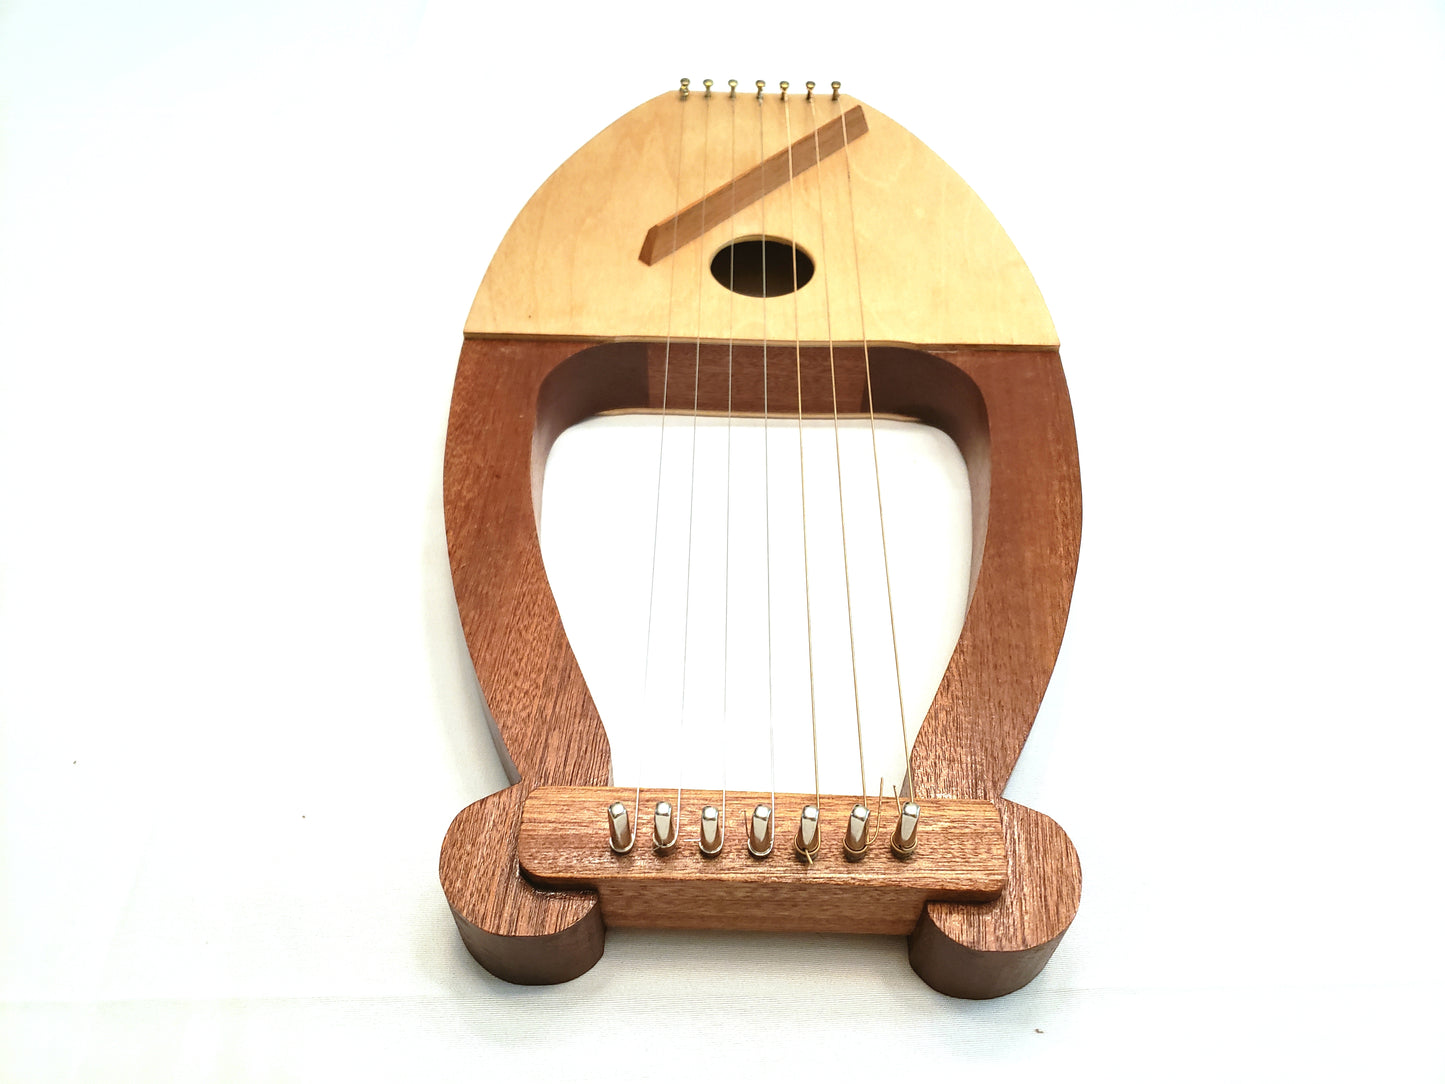 lyre with 7 strings: top view